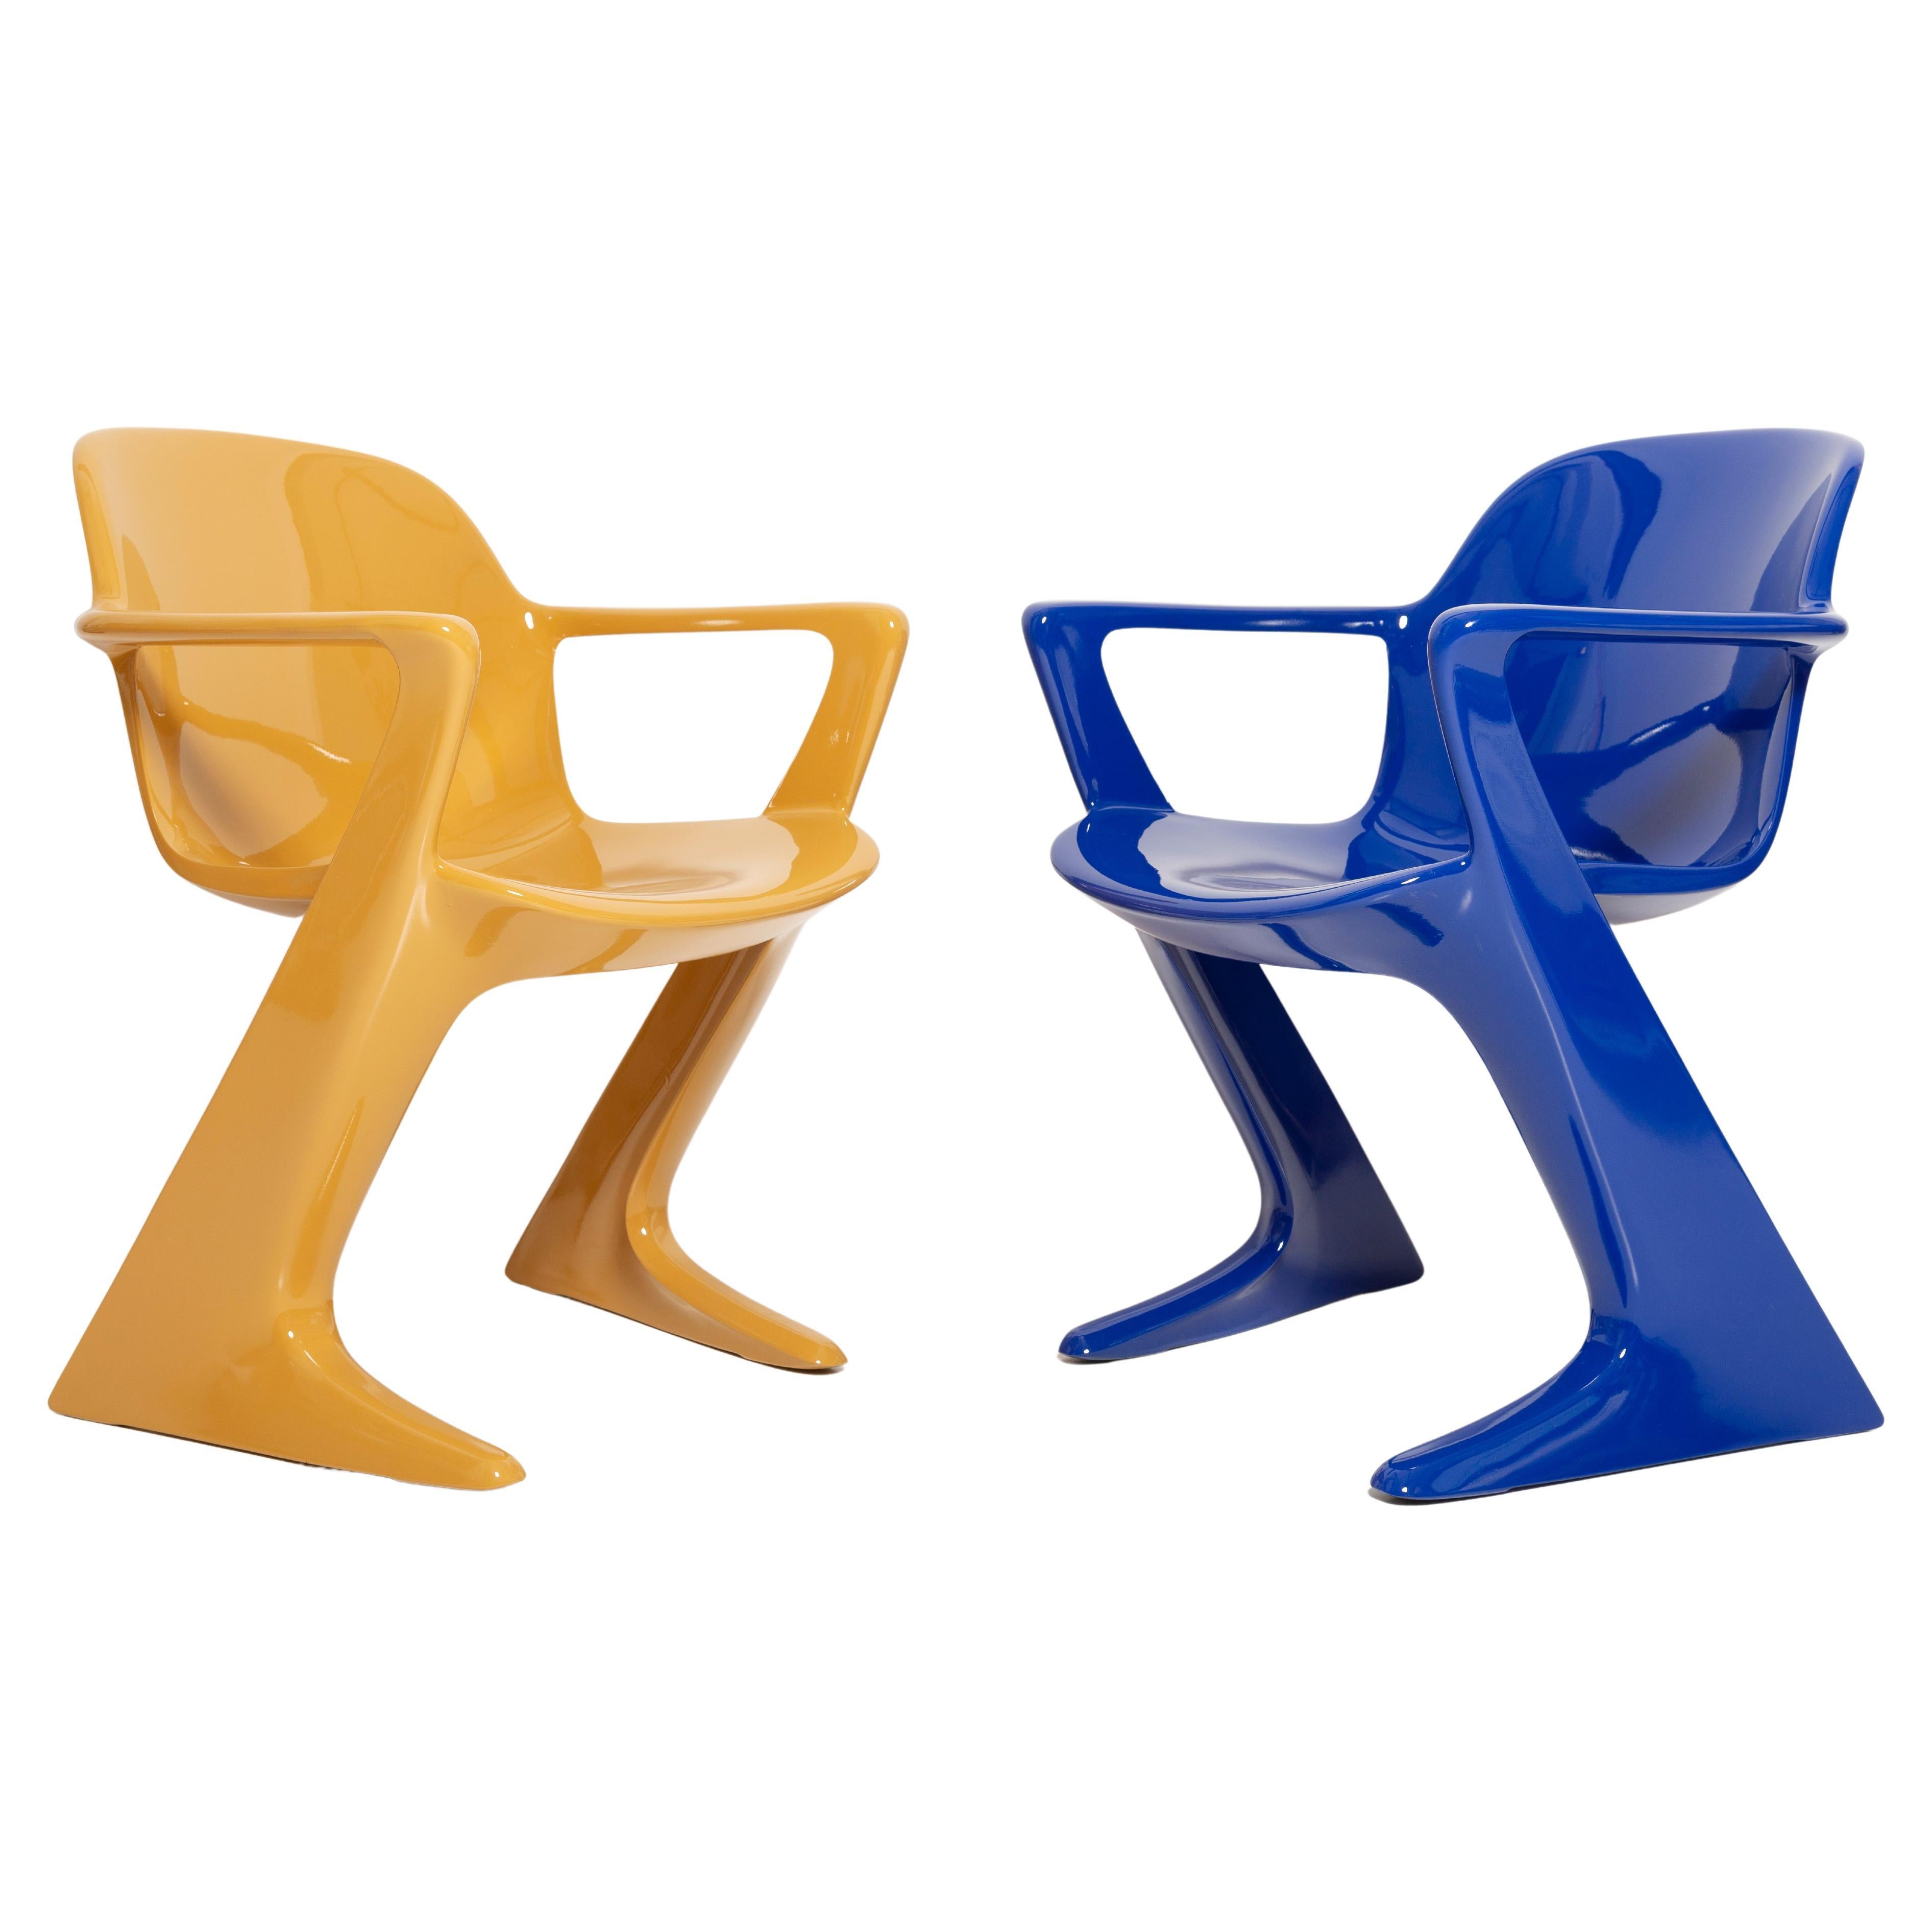 Two Mid-Century Mustard and Blue Kangaroo Chairs Ernst Moeckl, Germany, 1968